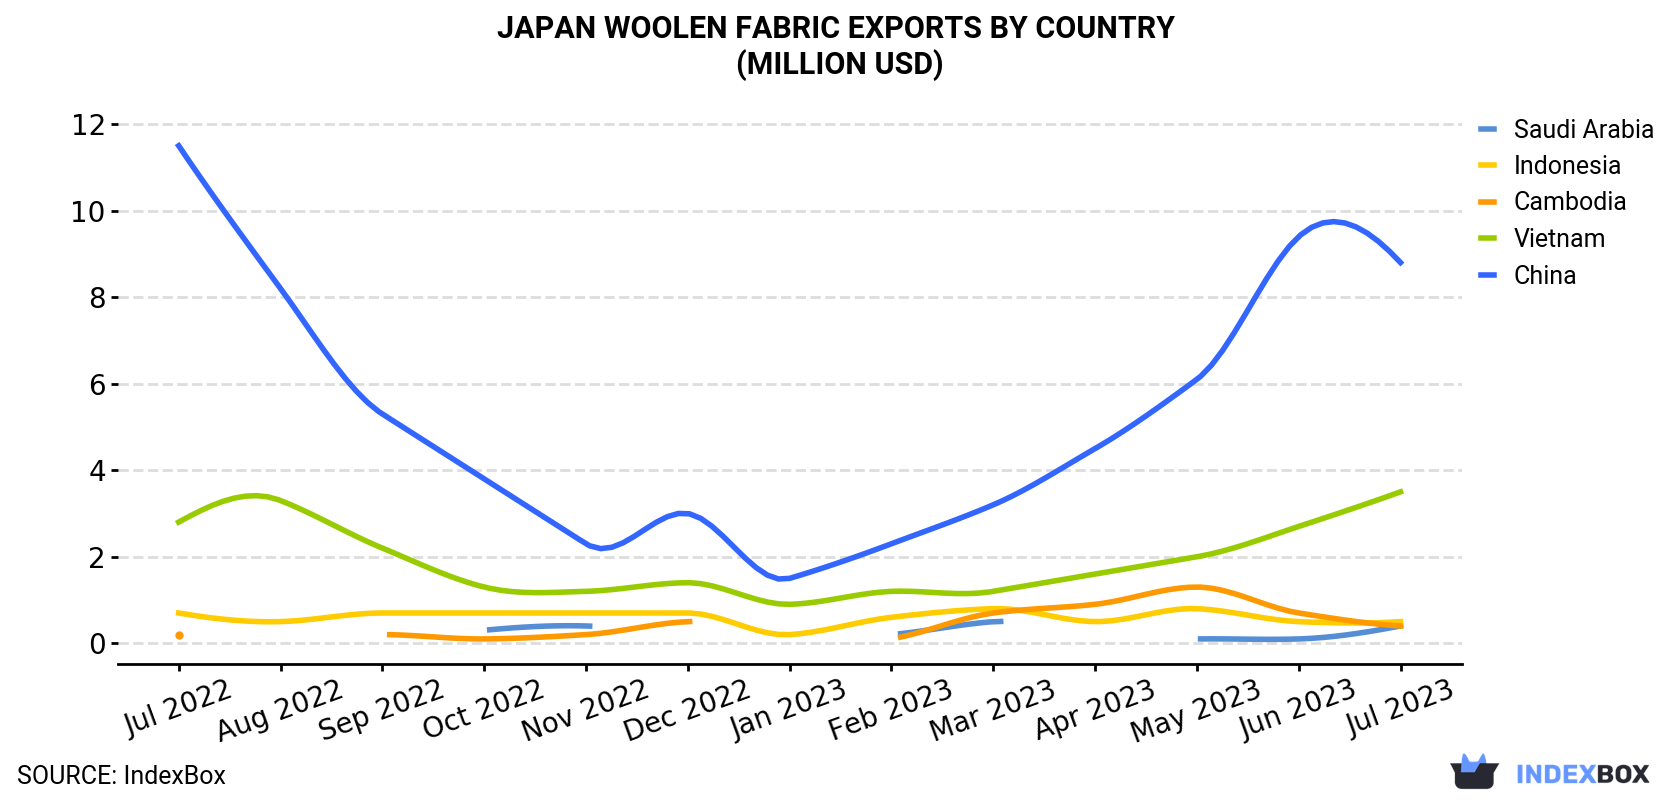 Japan Woolen Fabric Exports By Country (Million USD)